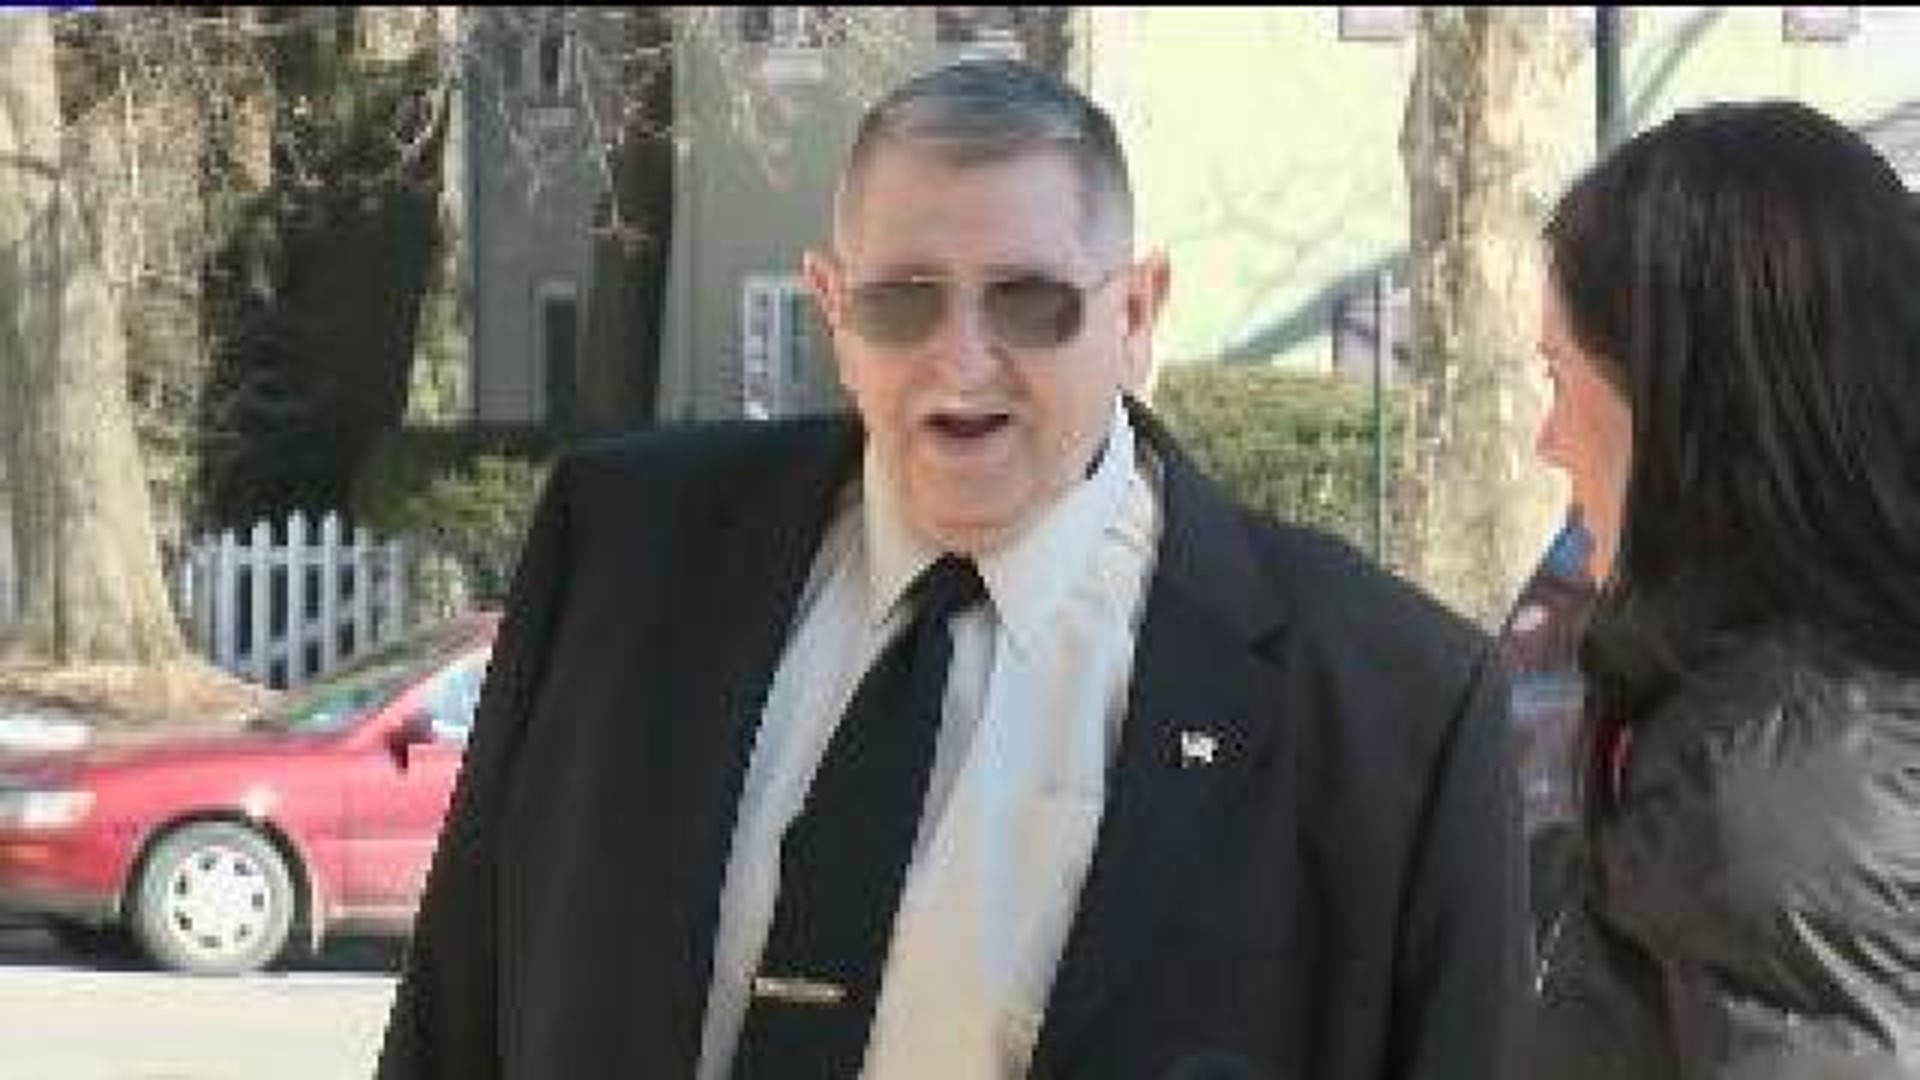 Former Police Chief Sentenced to Probation